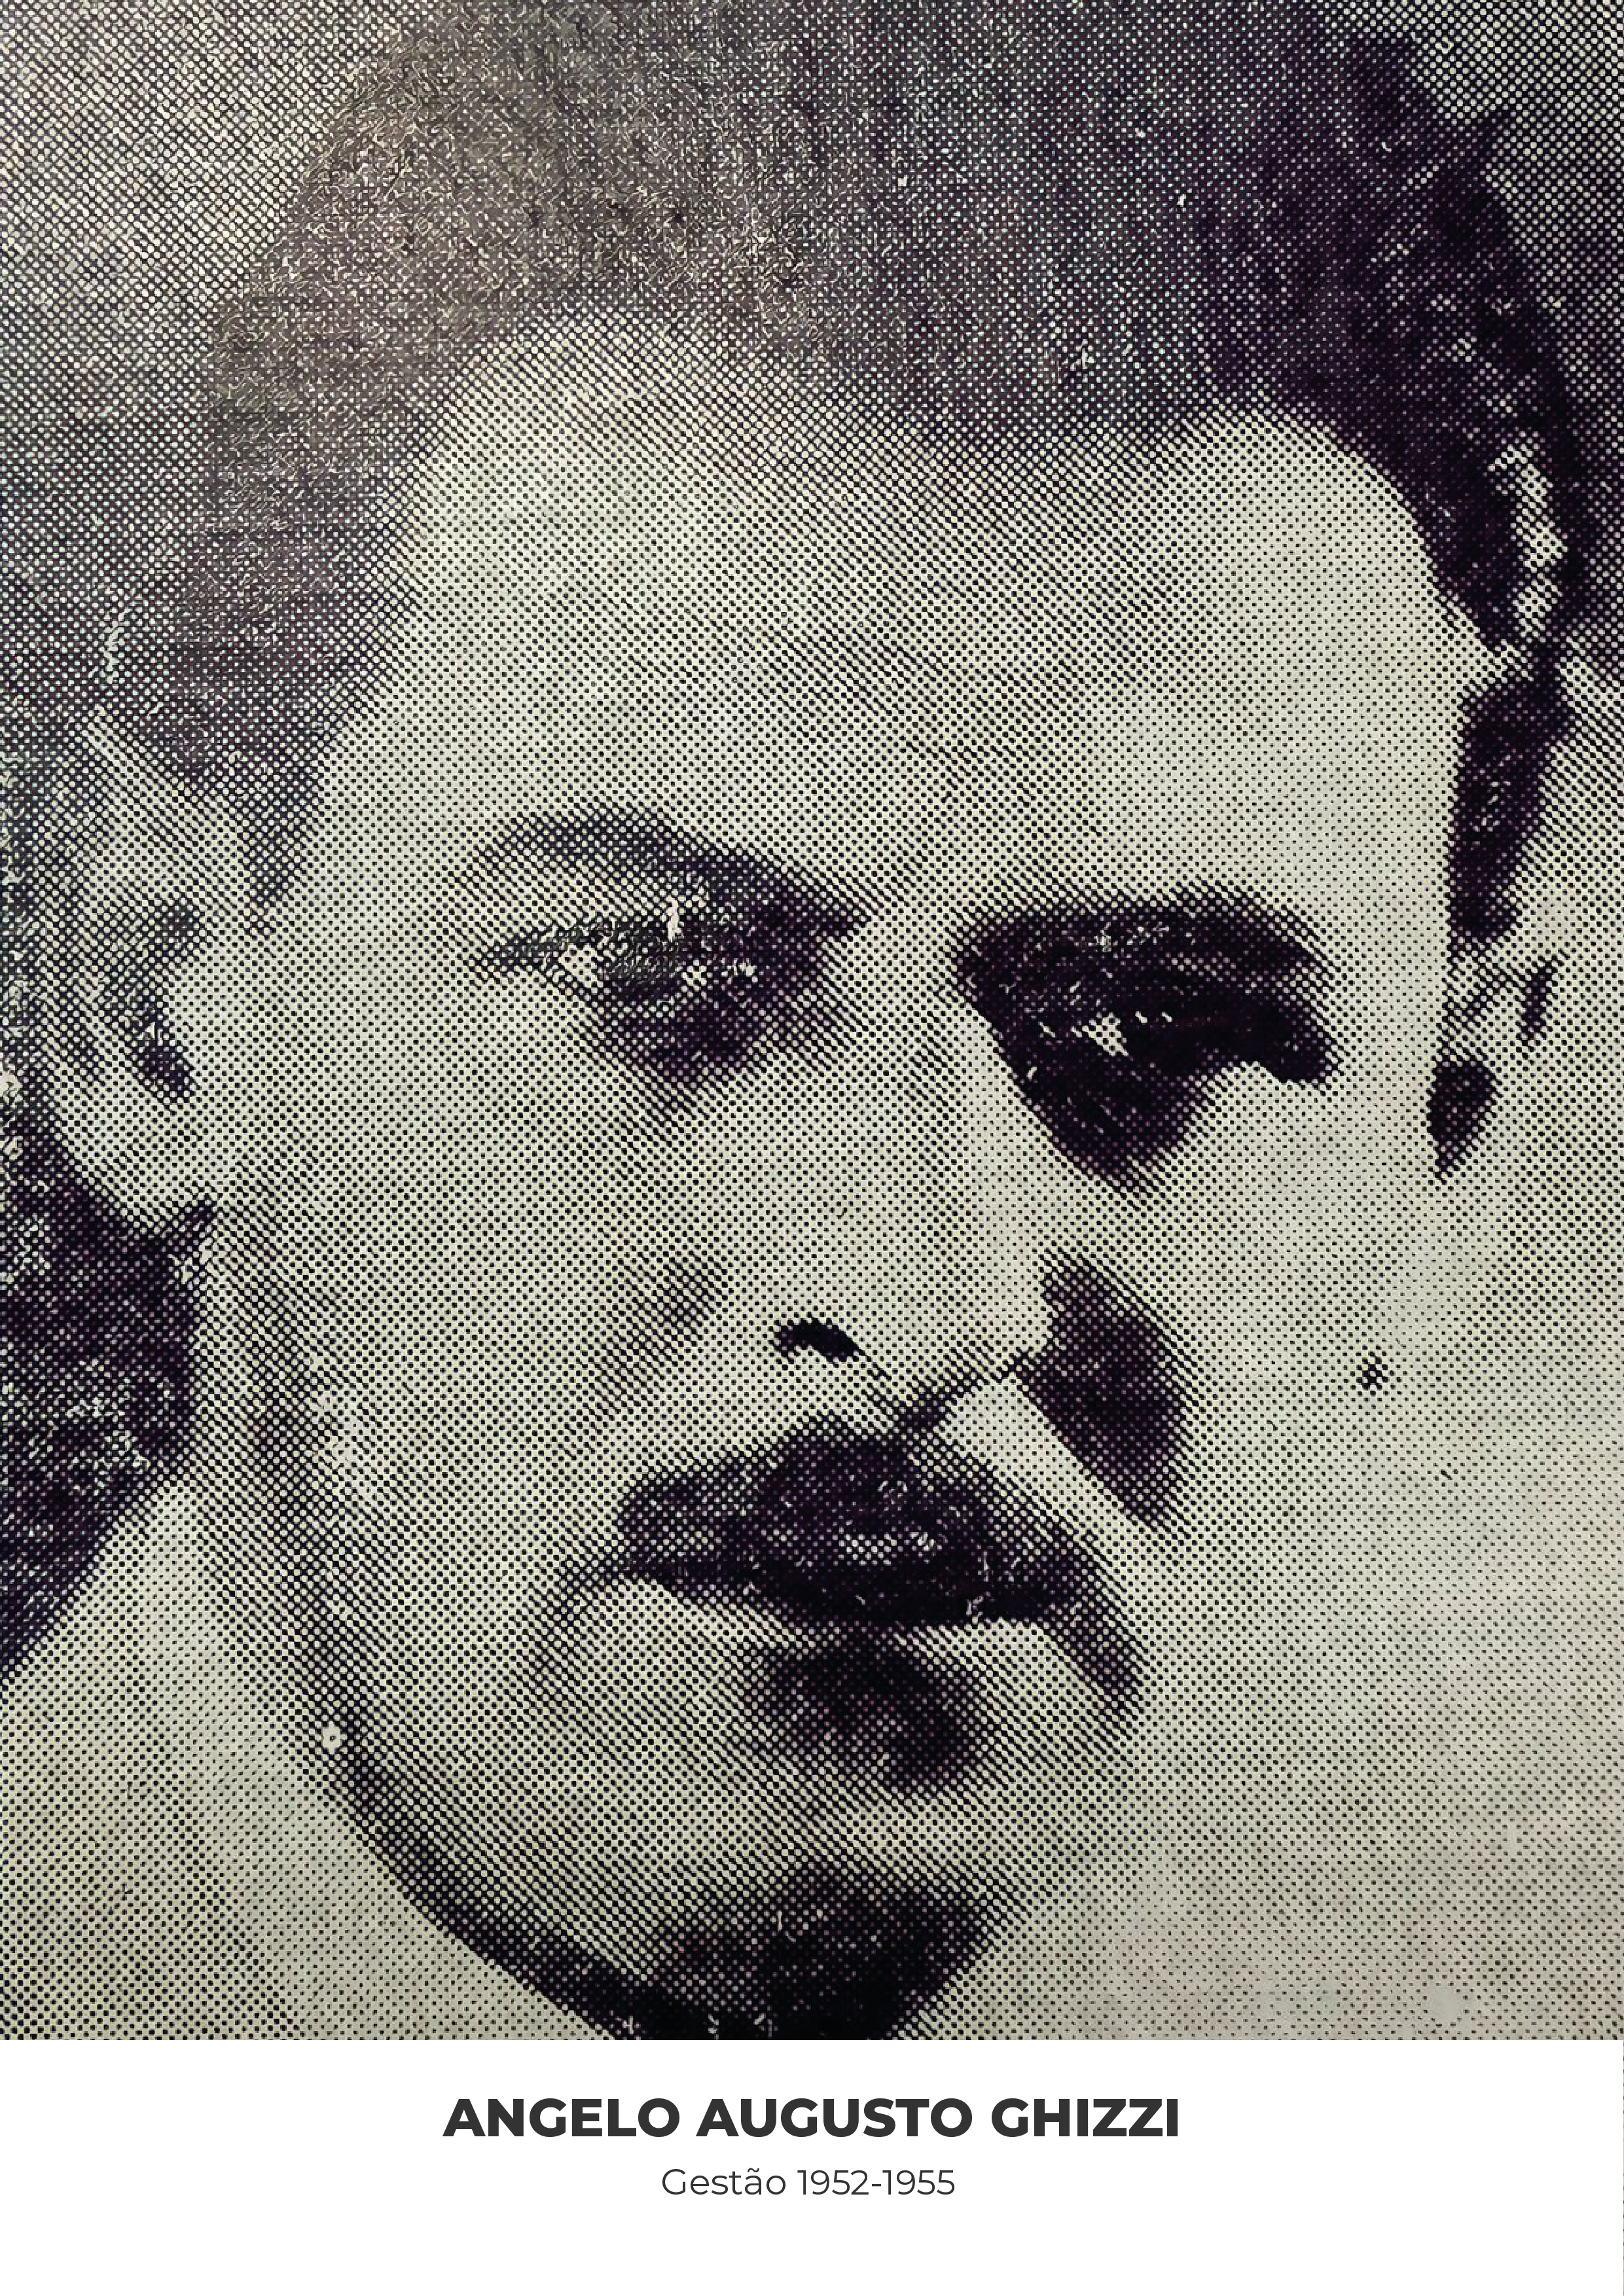 Angelo Augusto Ghizzi